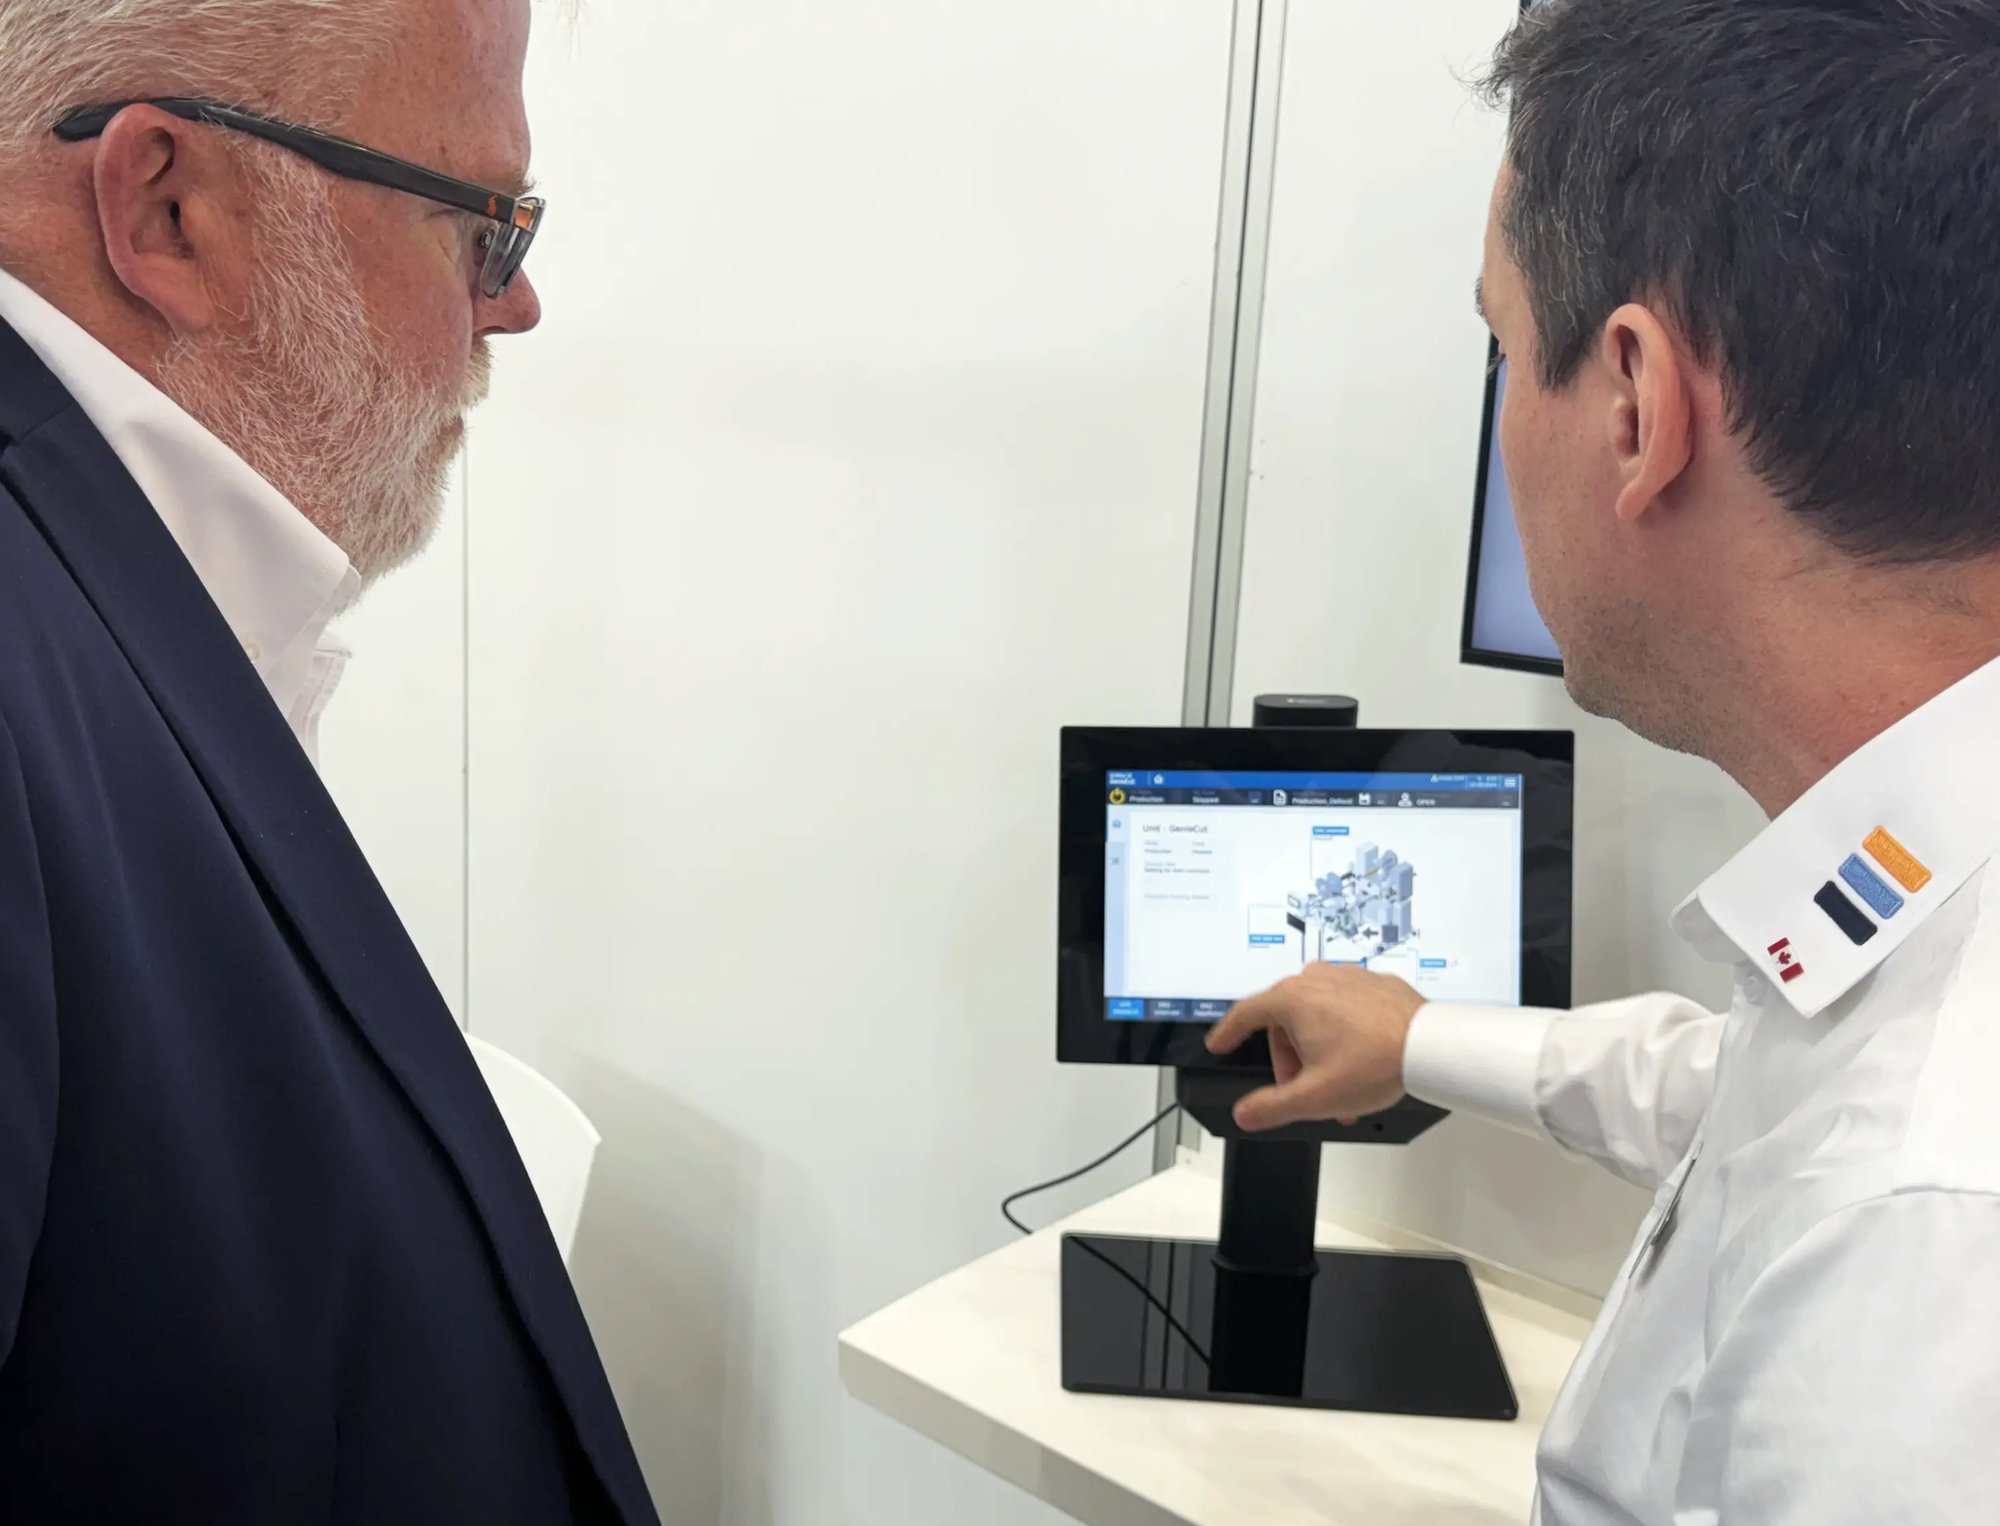 Mathieu Tremblay shows a visitor the new automation app demo